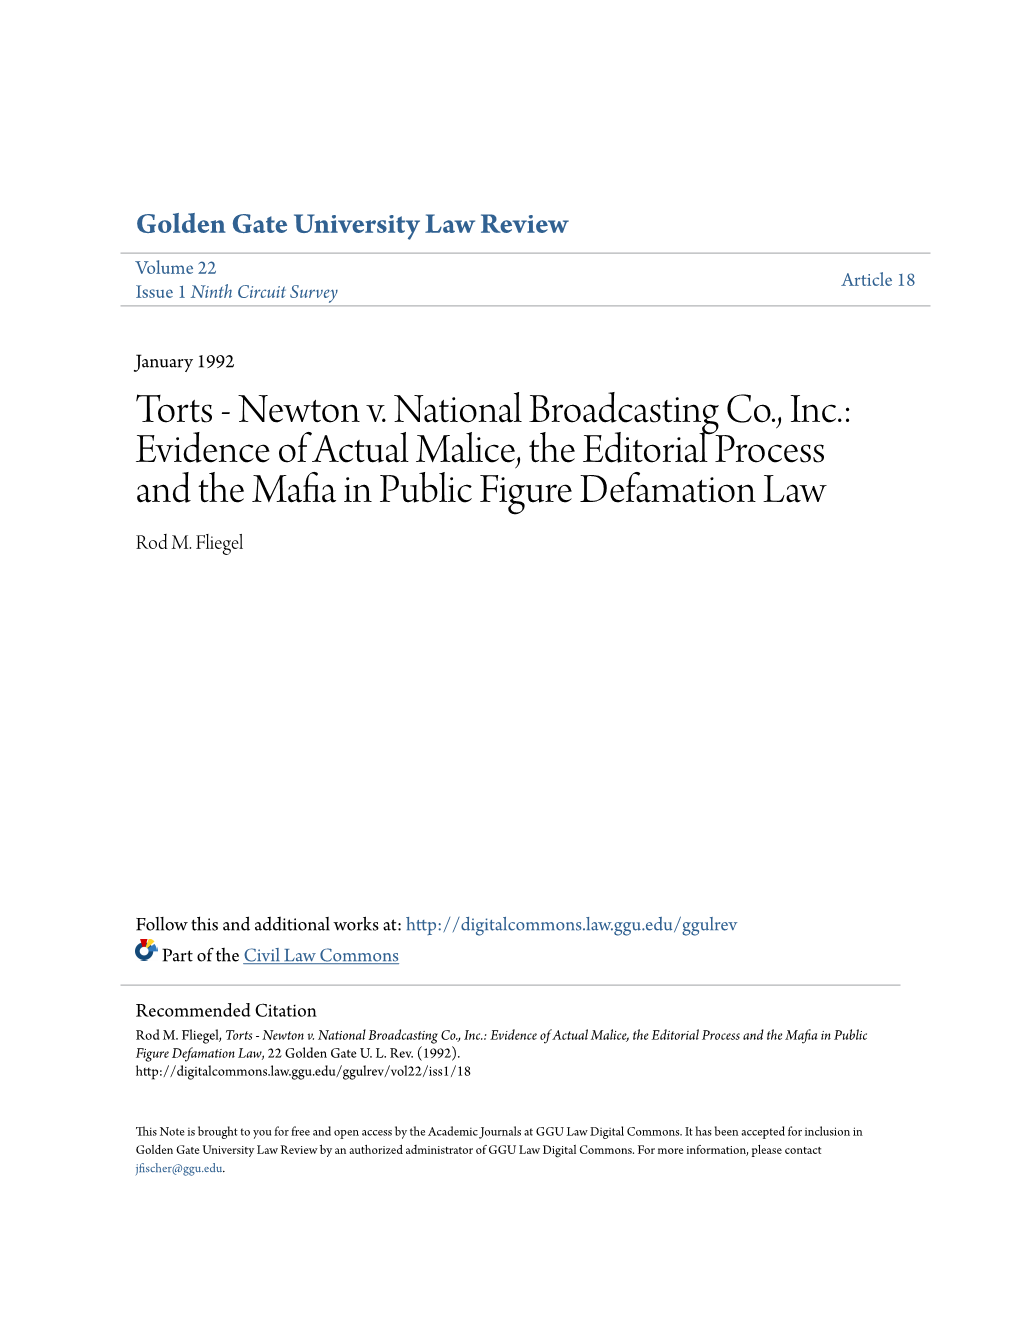 Newton V. National Broadcasting Co., Inc.: Evidence of Actual Malice, the Editorial Process and the Mafia in Public Figure Defamation Law Rod M